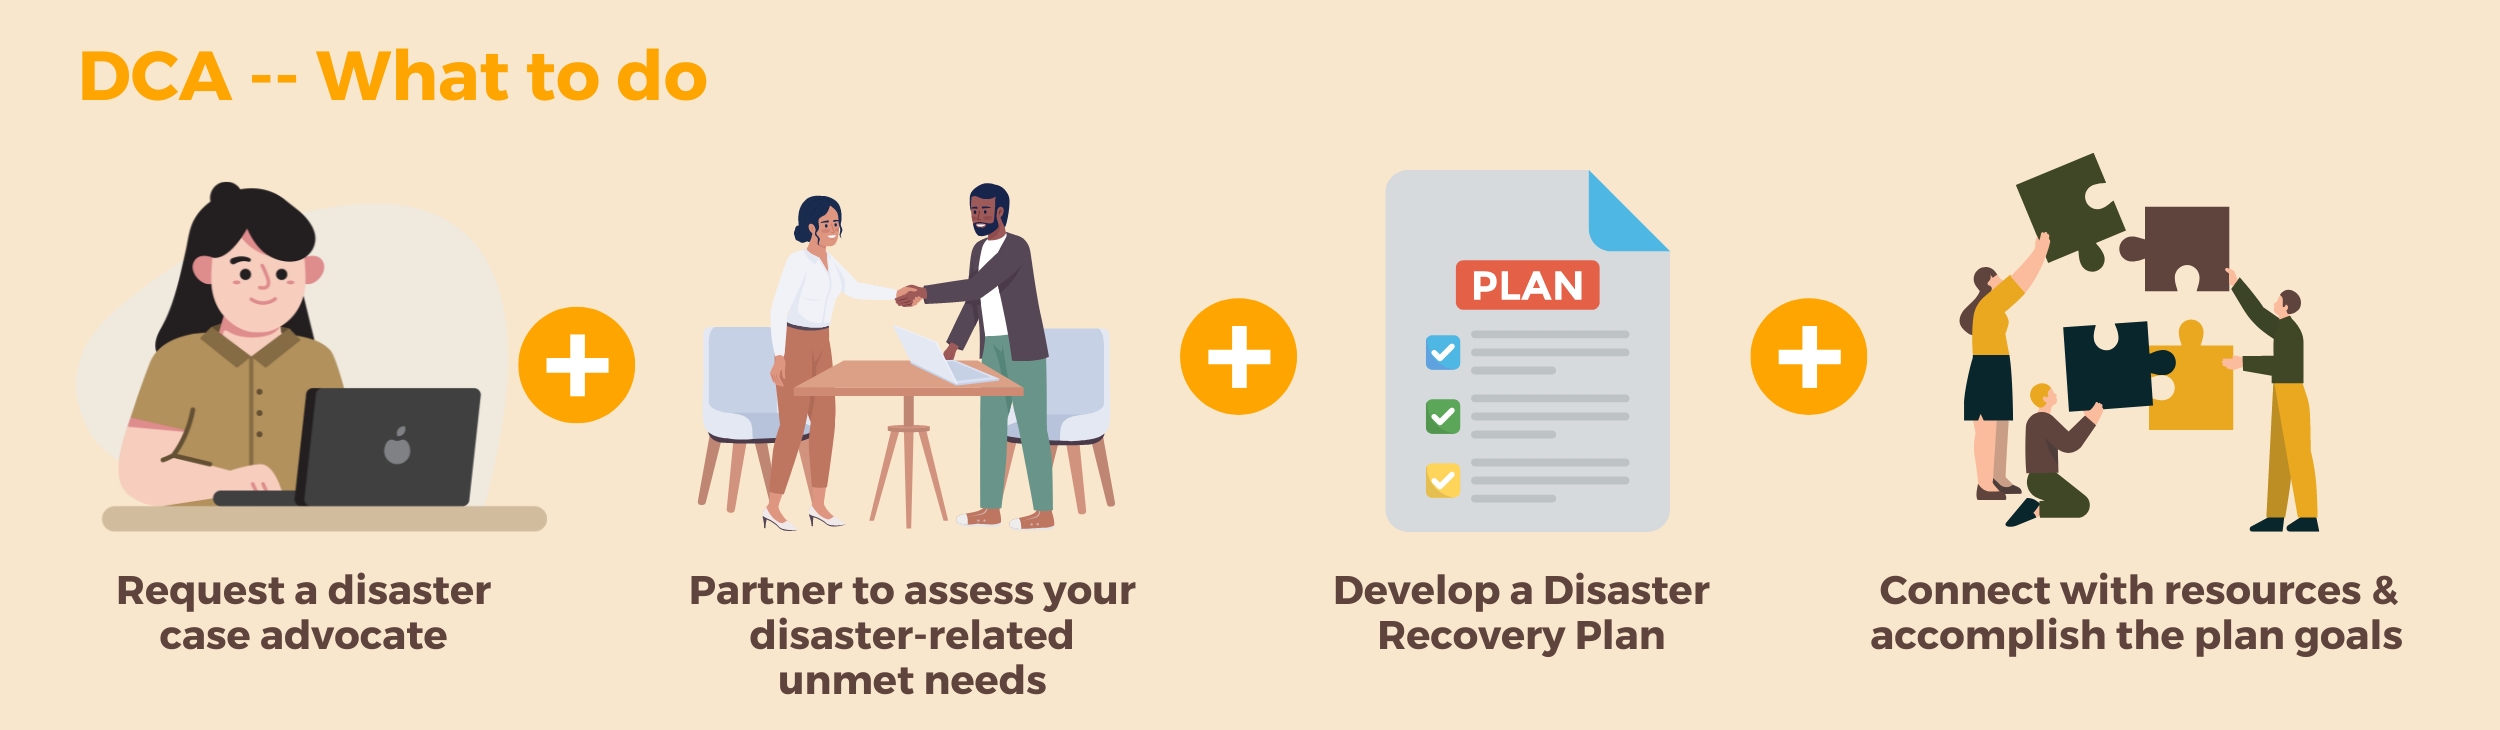 DCA--What to do: Request a disaster case advocate + Partner to assess your disaster-related unmet needs + Develop a Disaster Recovery Plan + Connect with resources & accomplish the plan goals